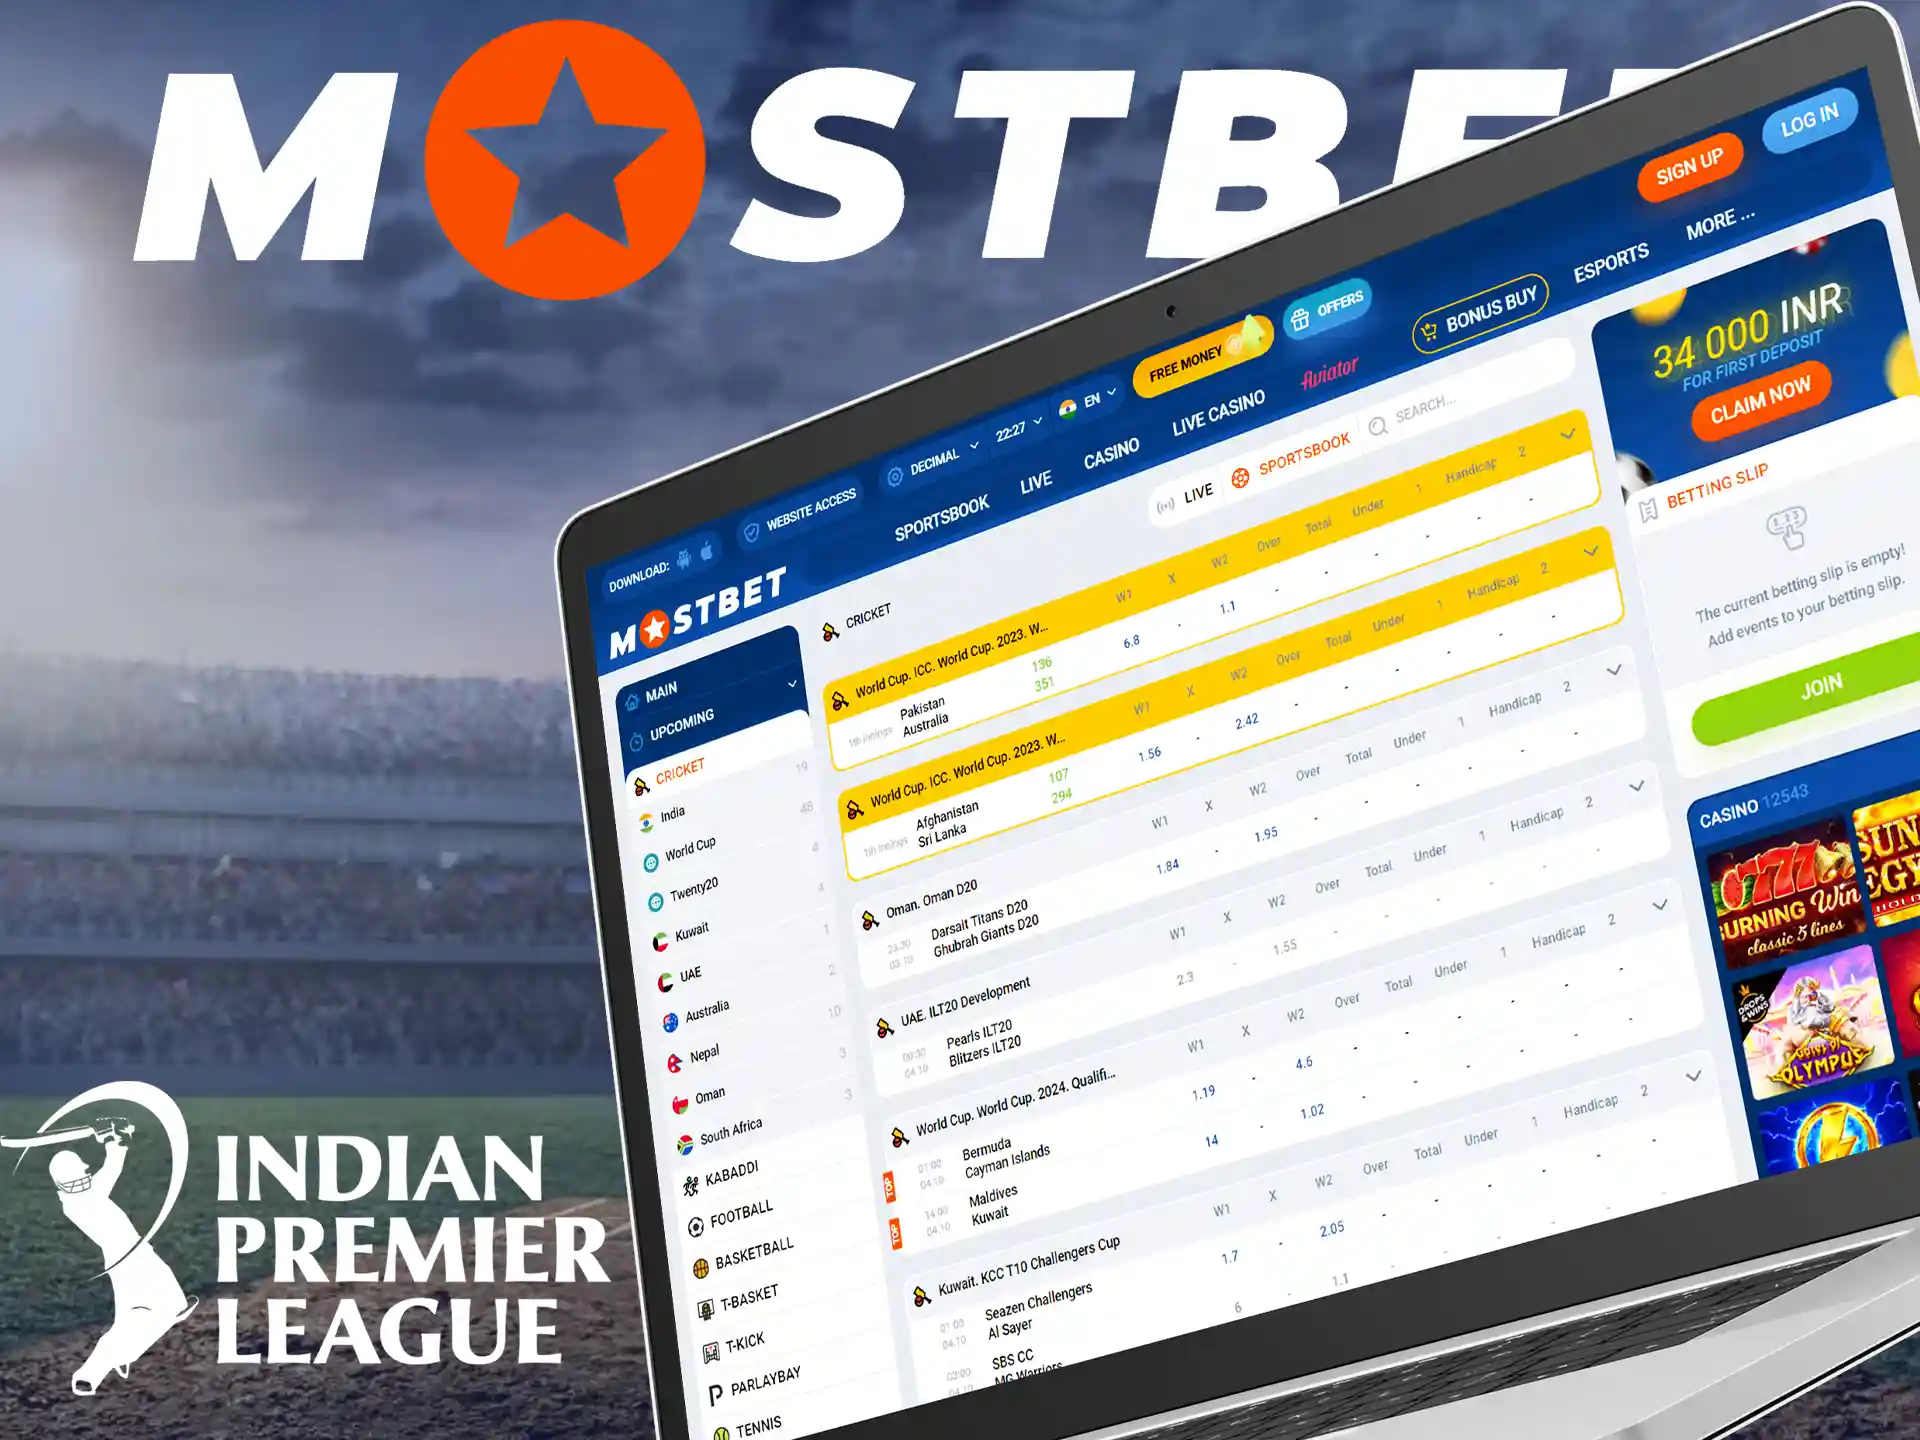 Place your bets on the IPL match and follow the results at Mostbet.